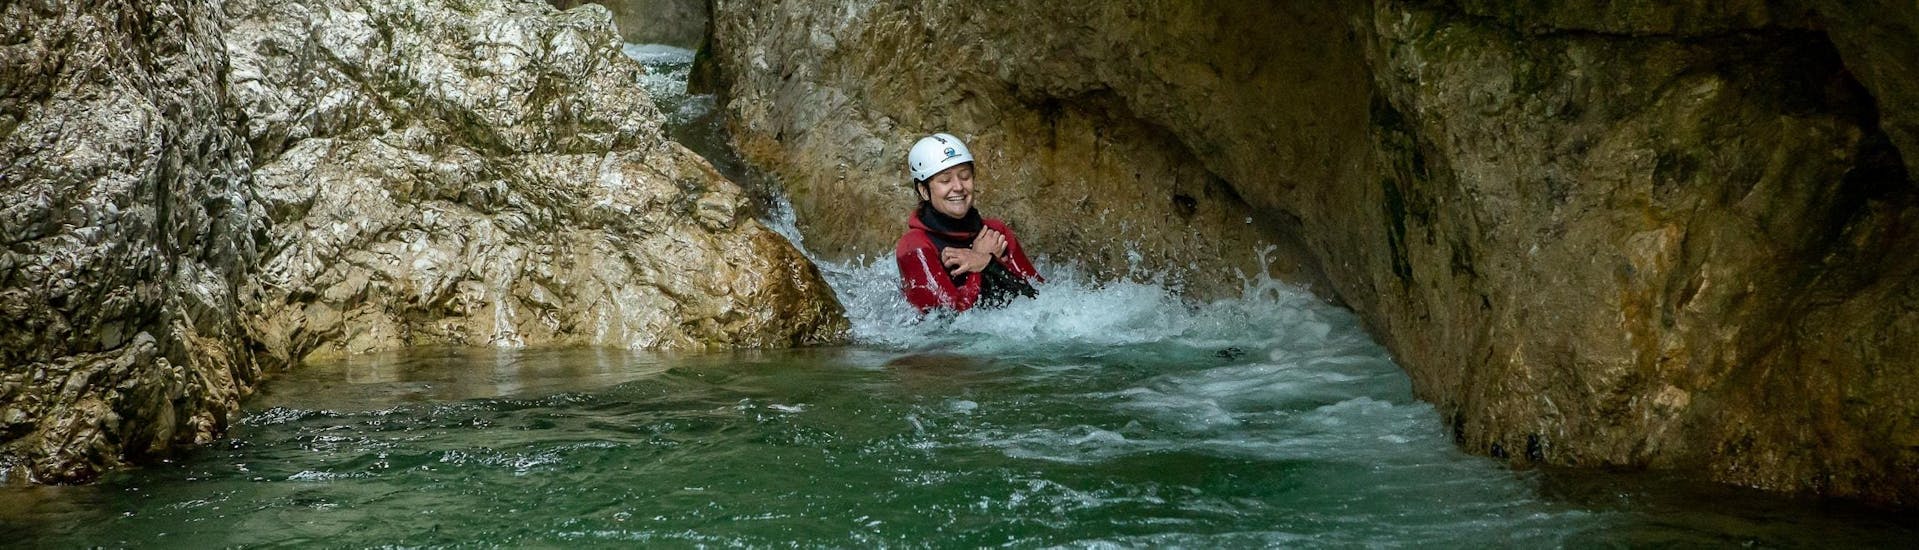 A woman sliding down into the waters of the canyon during Canyoning in Strubklamm - Full Day Tour with Der Guide Brixental.